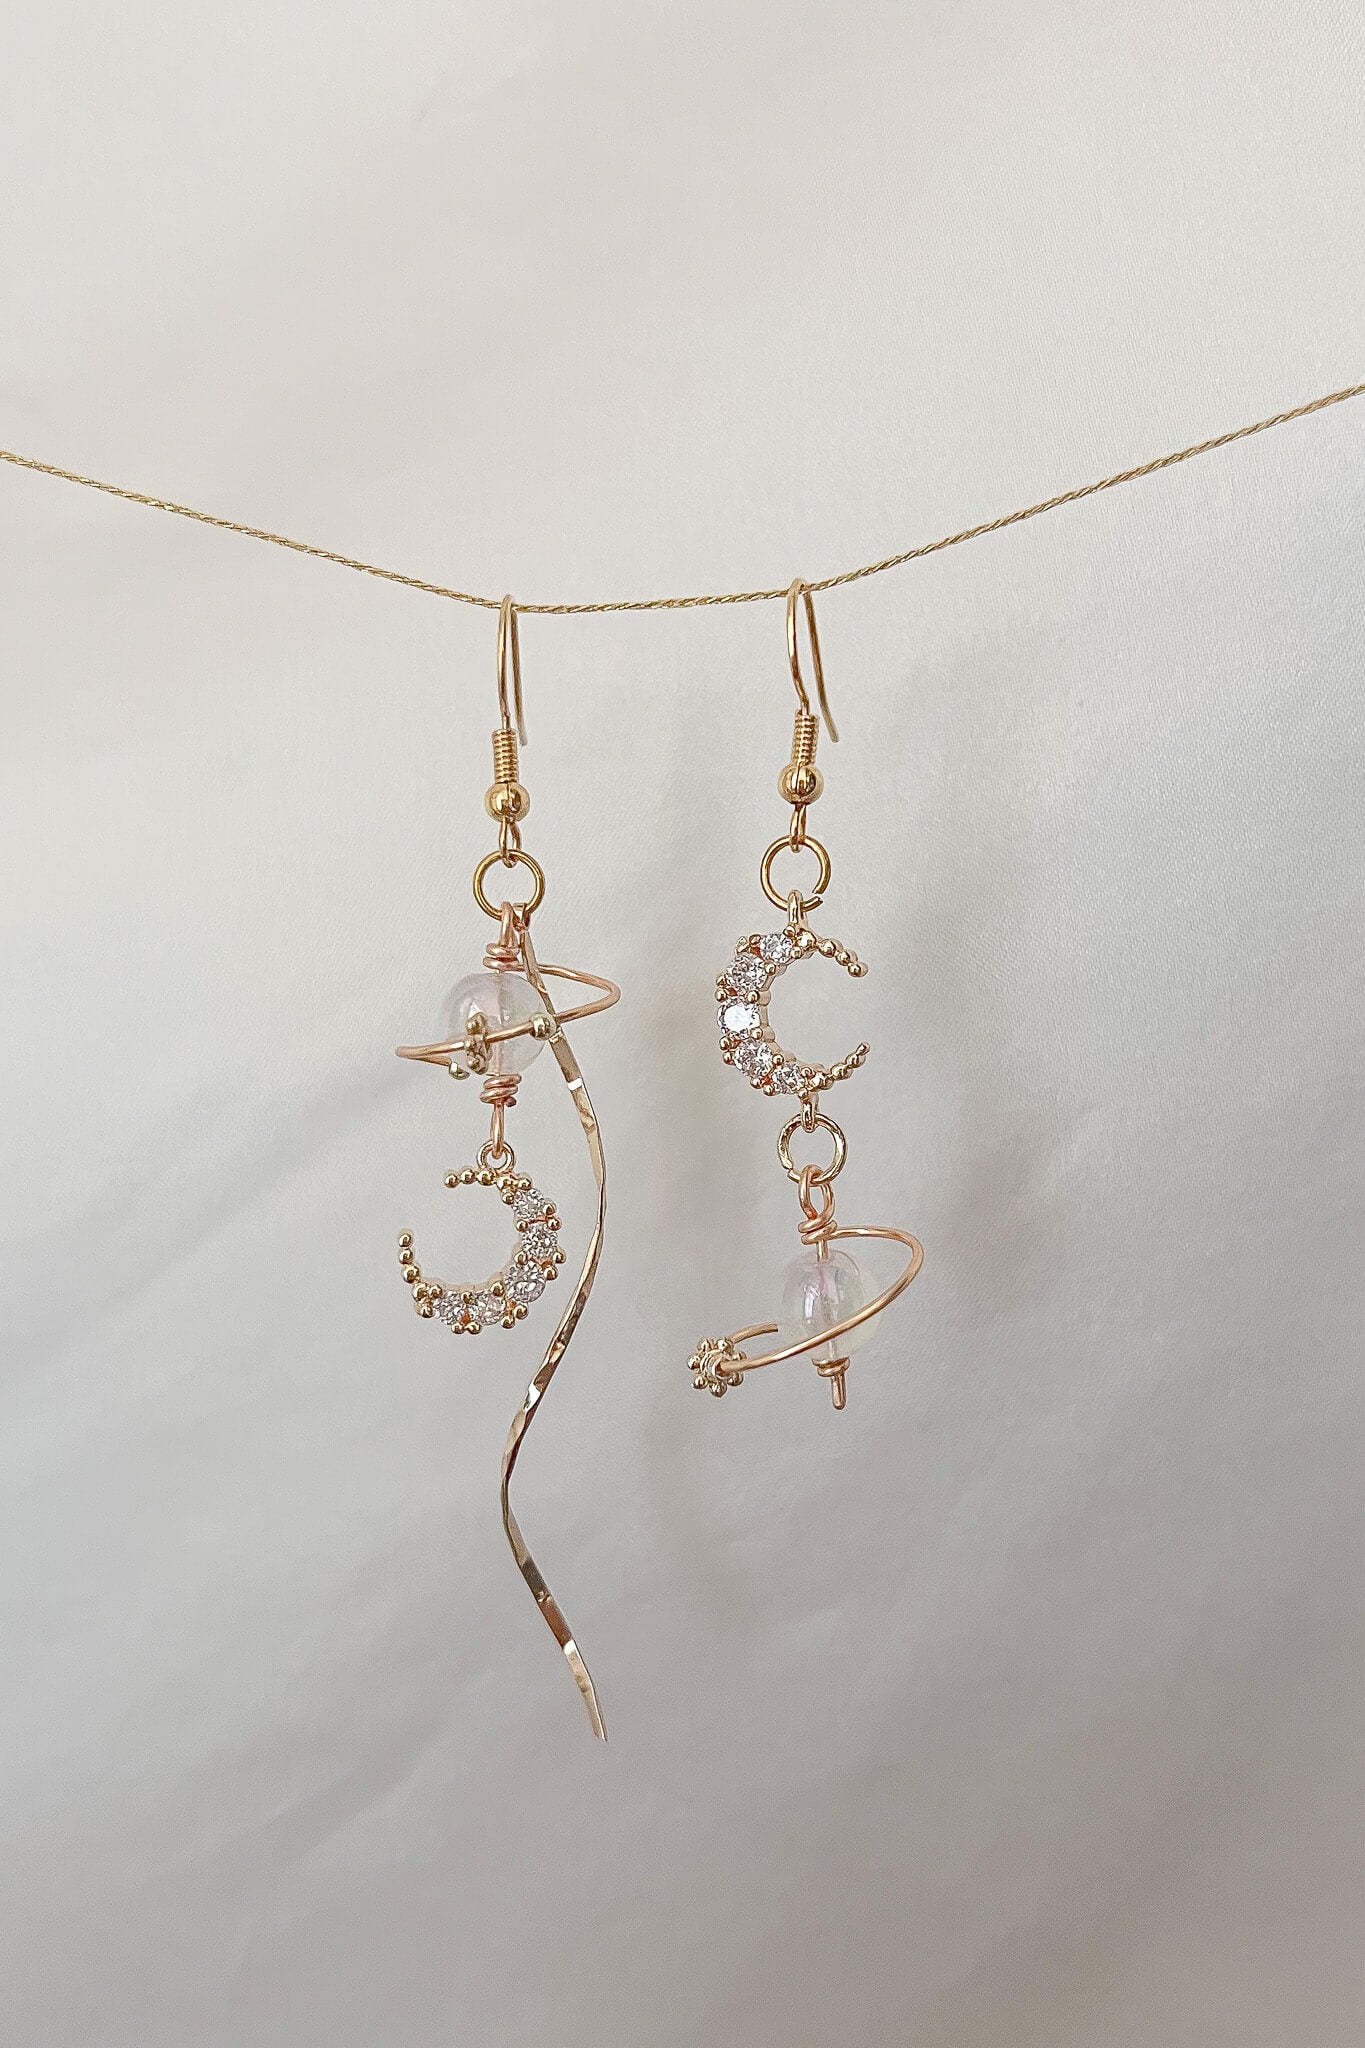 Inspired by taylor swift folklore seven dangling moon charm and saturn hook earrings in gold